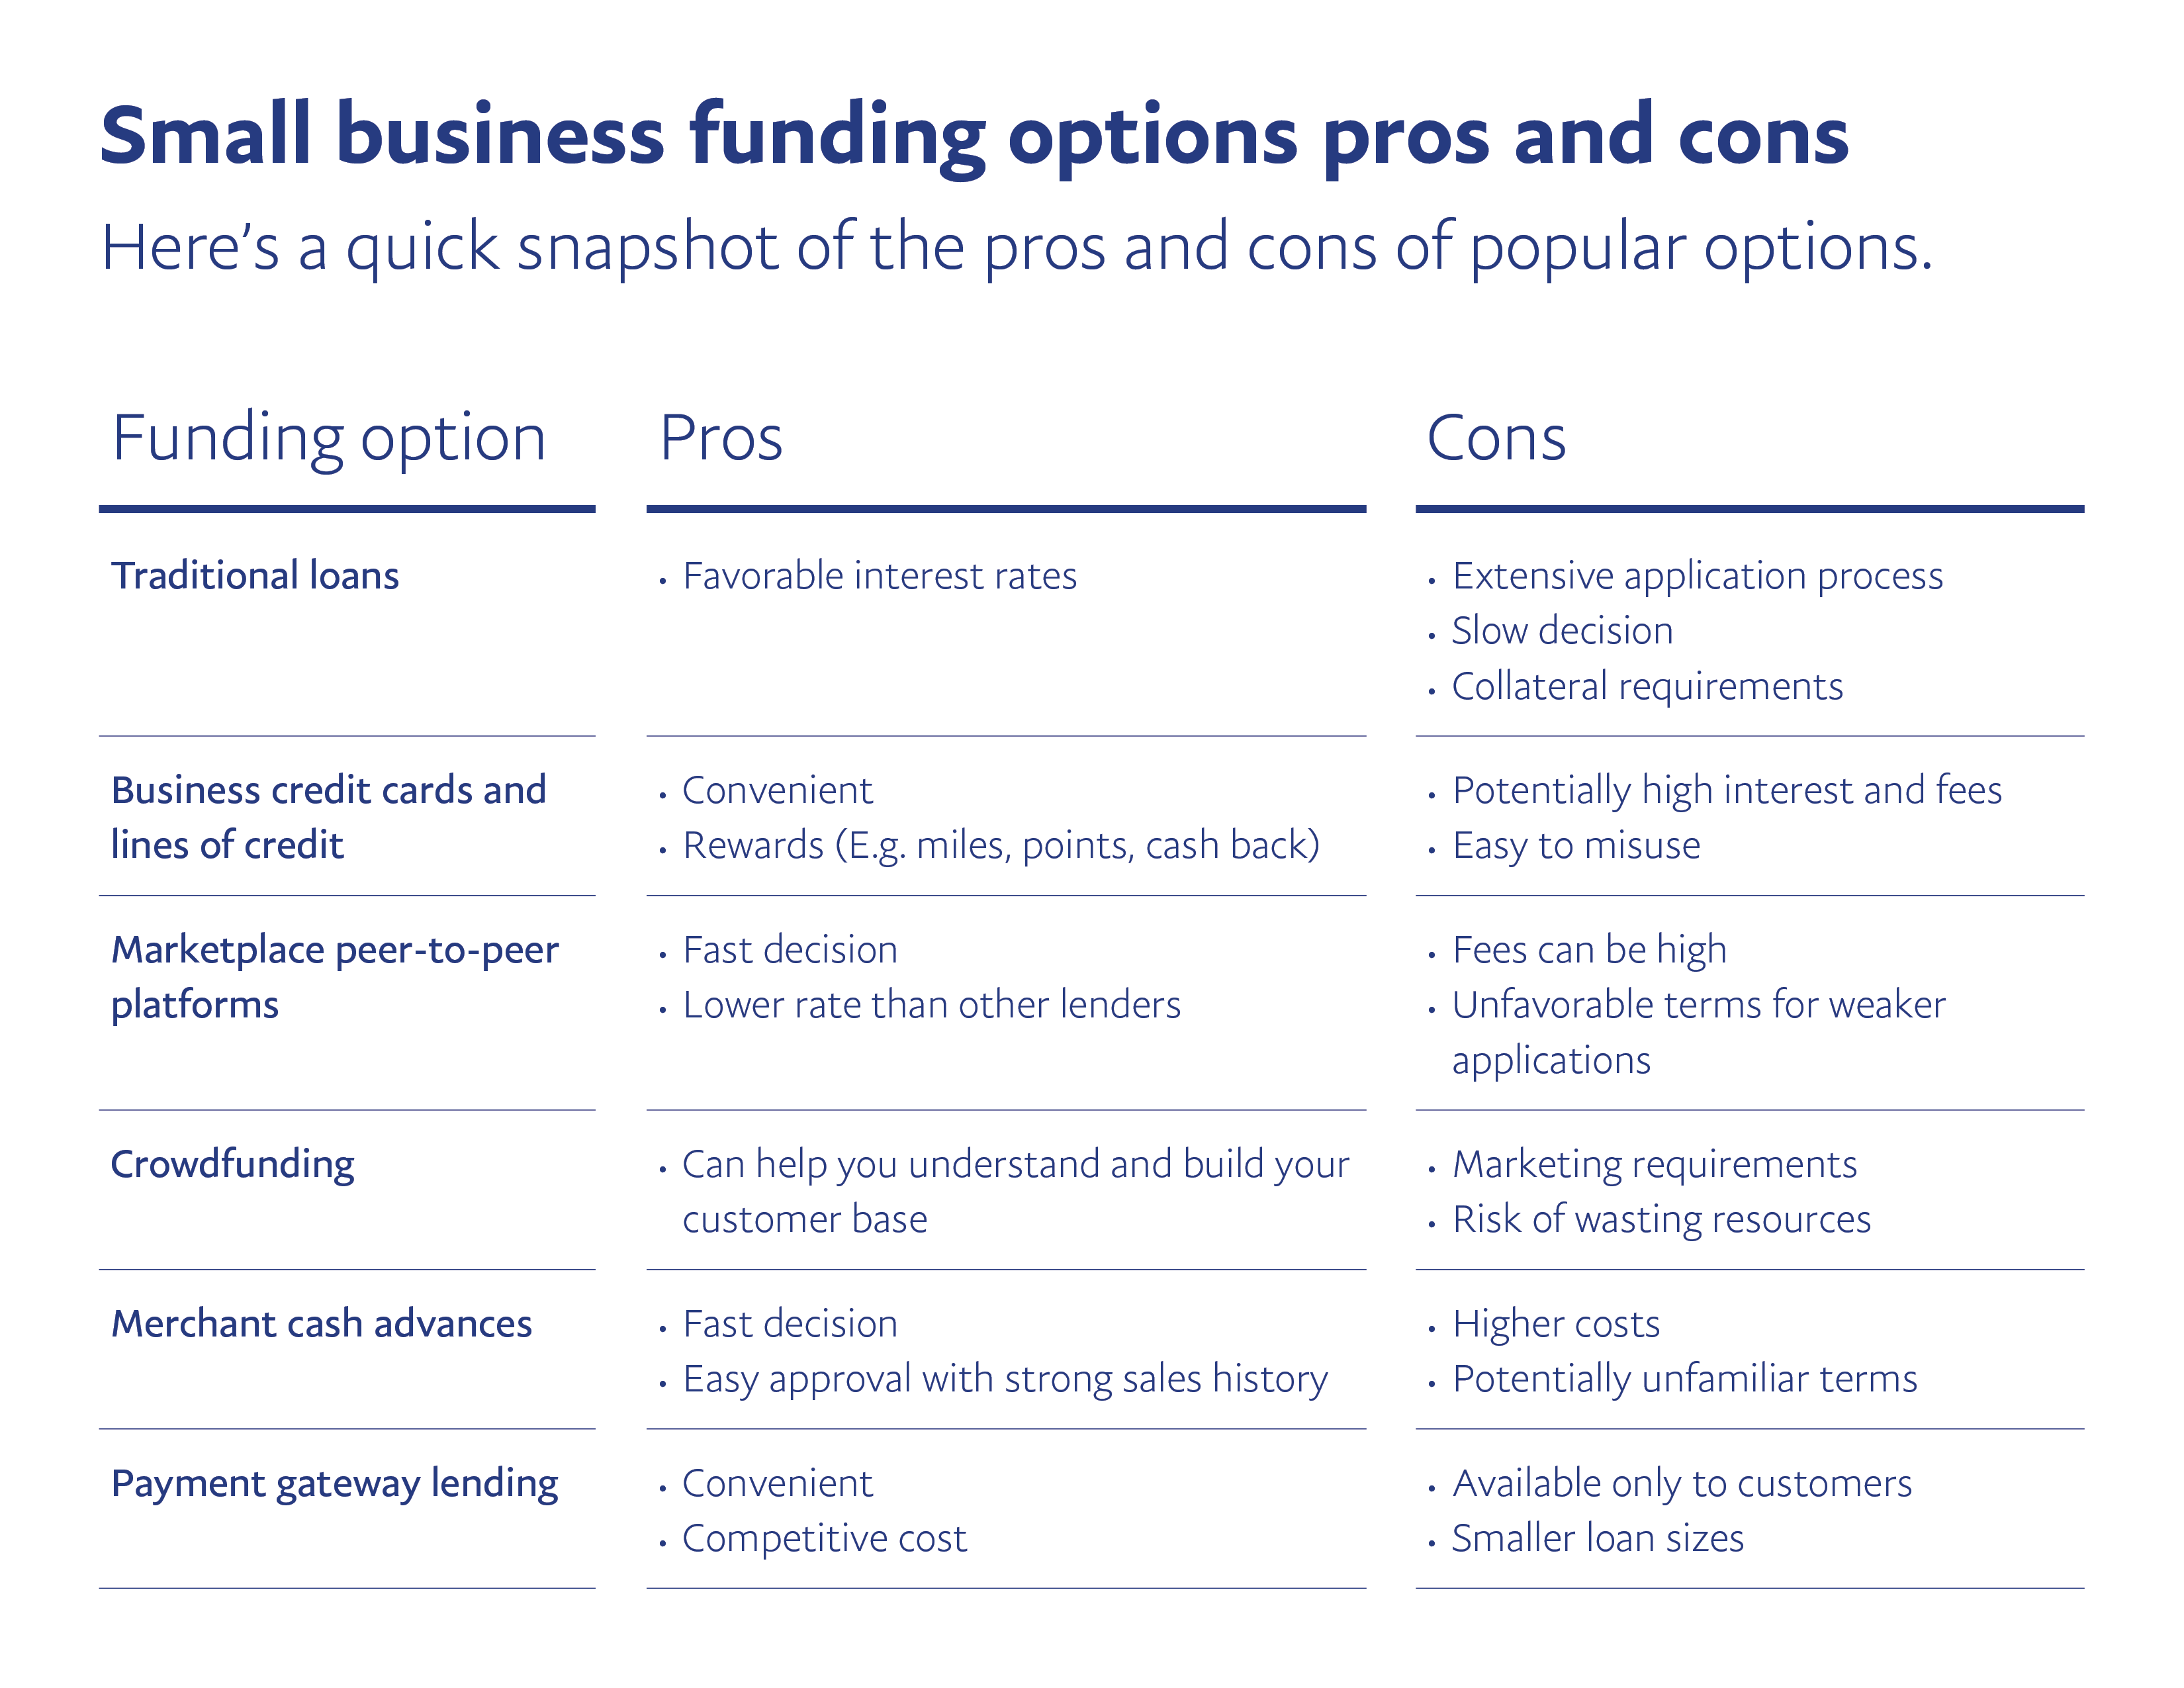 Small business funding options 